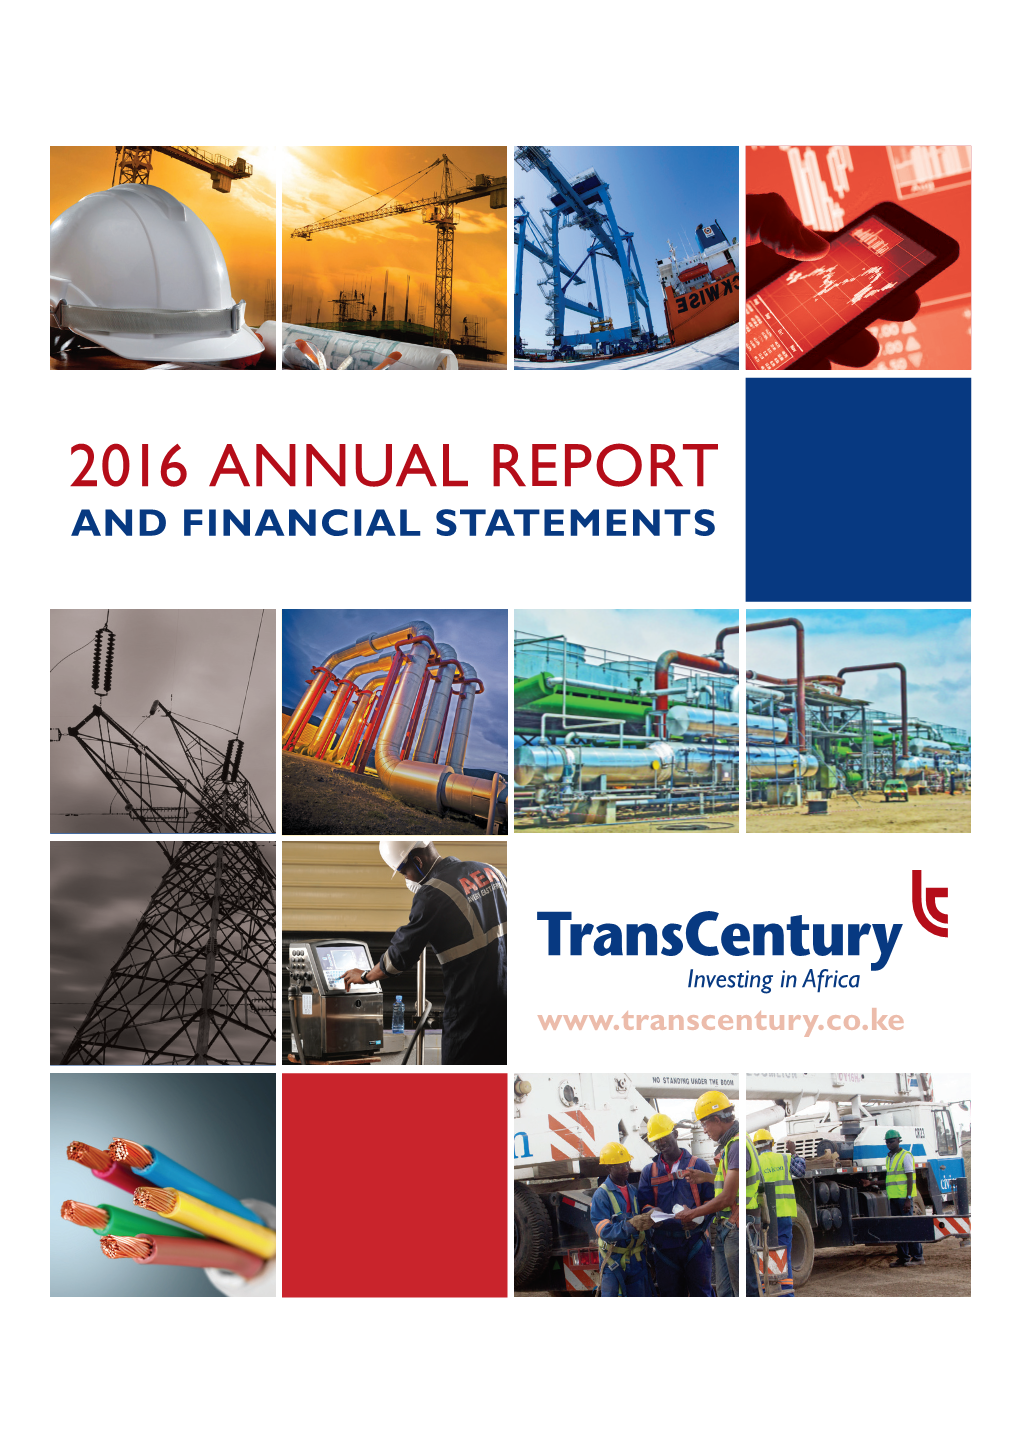 2016 Annual Report and Financial Statements